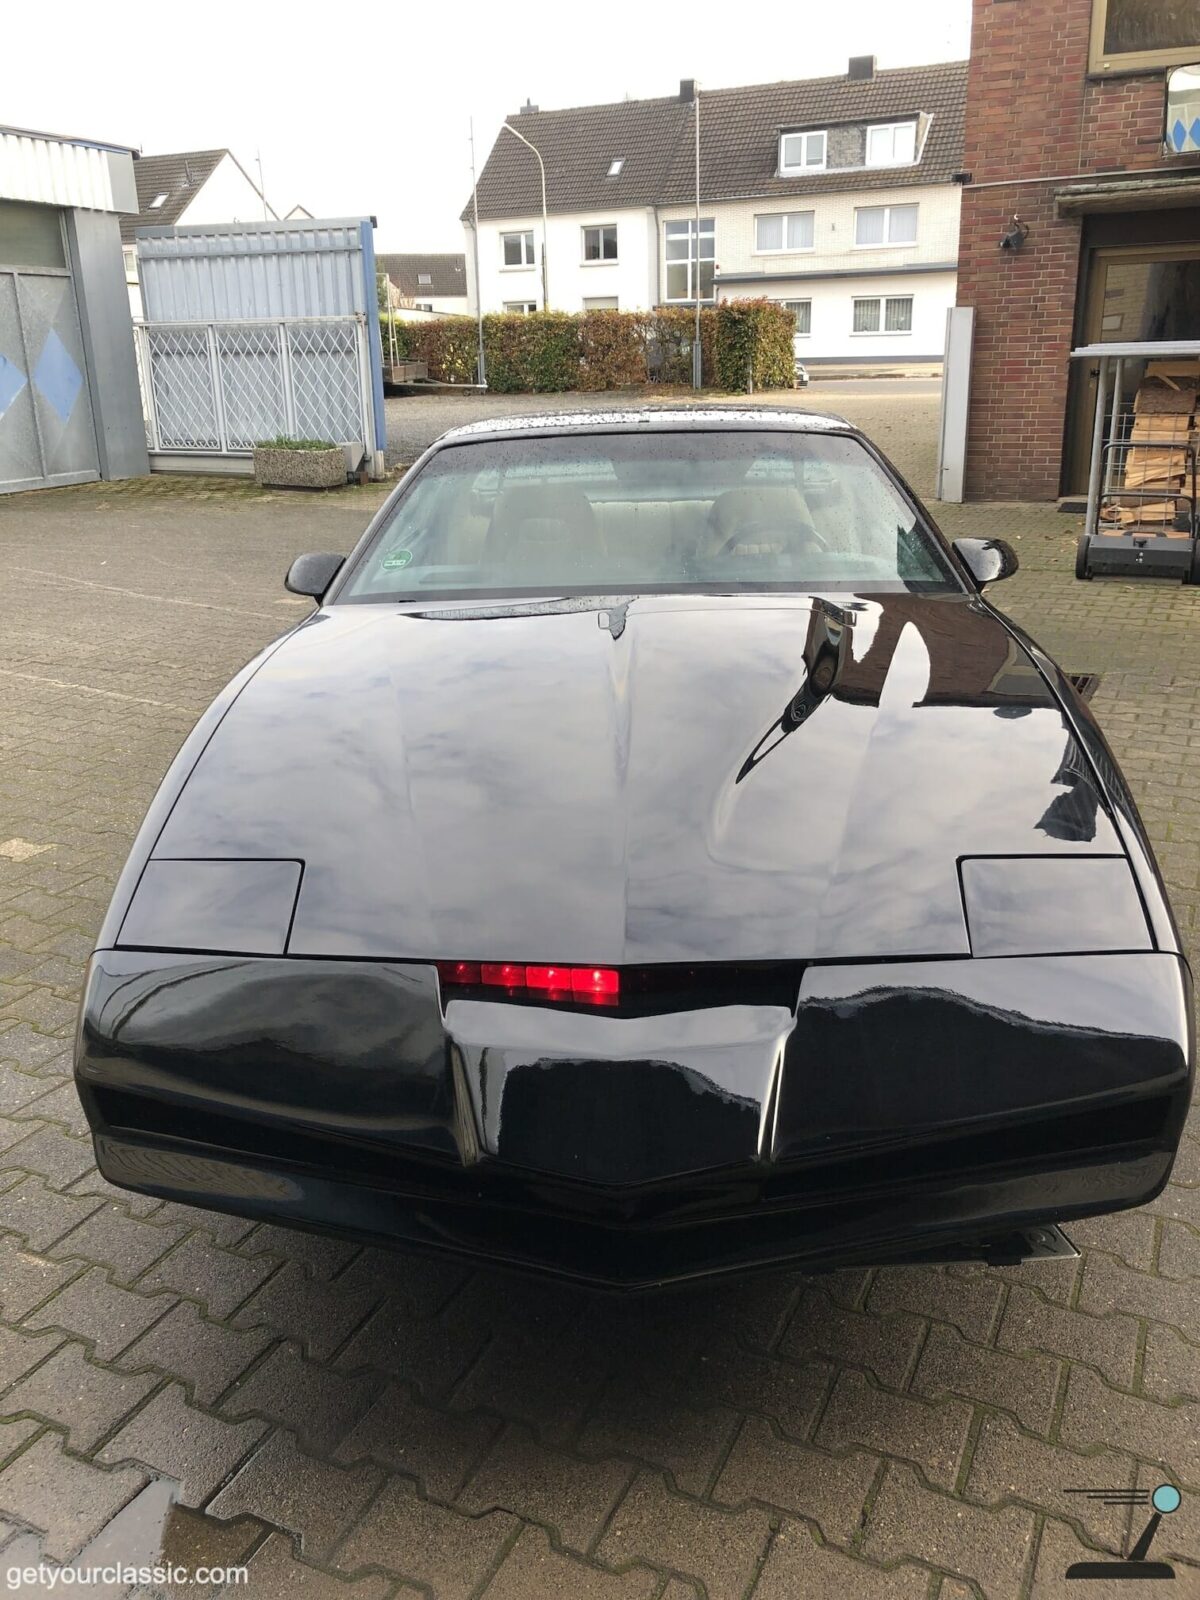 knight rider car for sale